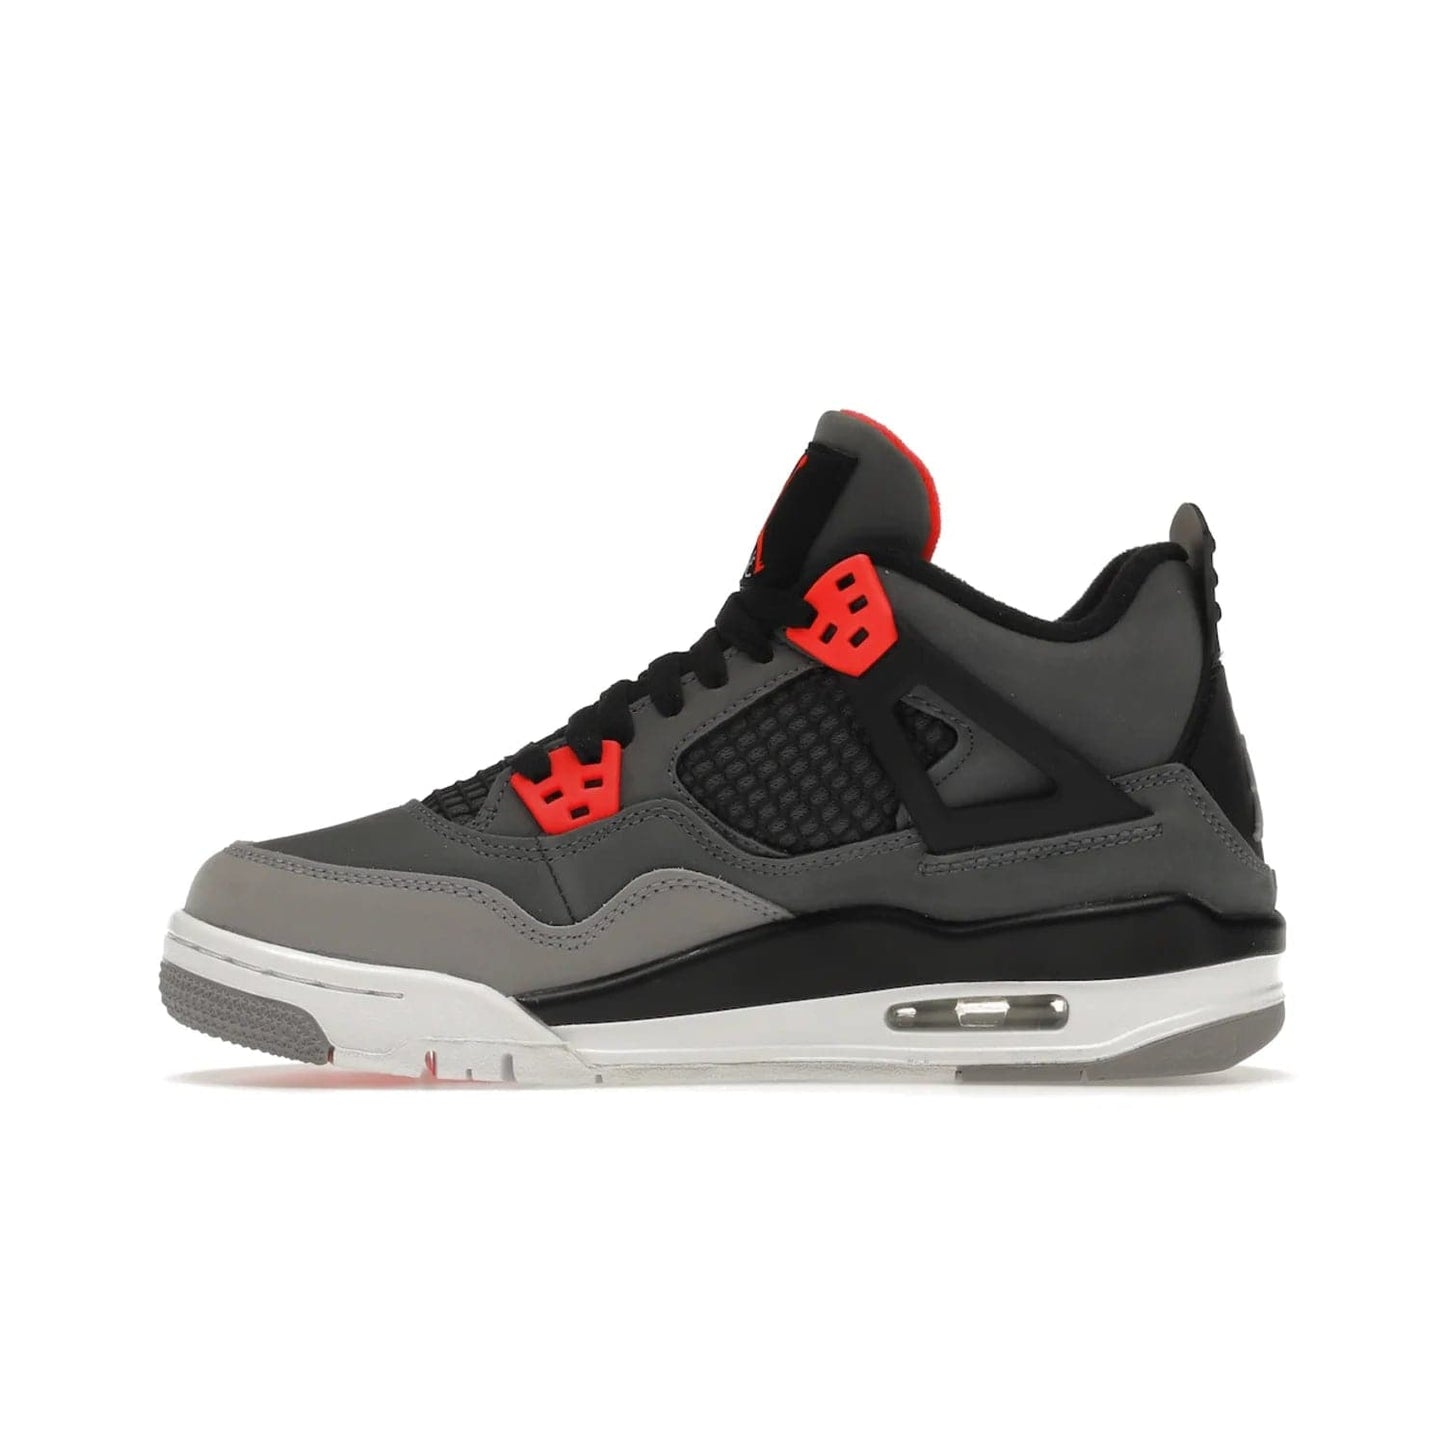 Jordan 4 Retro Infrared (GS) - Image 19 - Only at www.BallersClubKickz.com - Shop the Air Jordan 4 Retro Infrared (GS) for a classic silhouette with subtle yet bold features. Dark grey nubuck upper with lighter forefoot overlay, black accents, Infrared molded eyelets & woven tongue tag. Available June 2022.